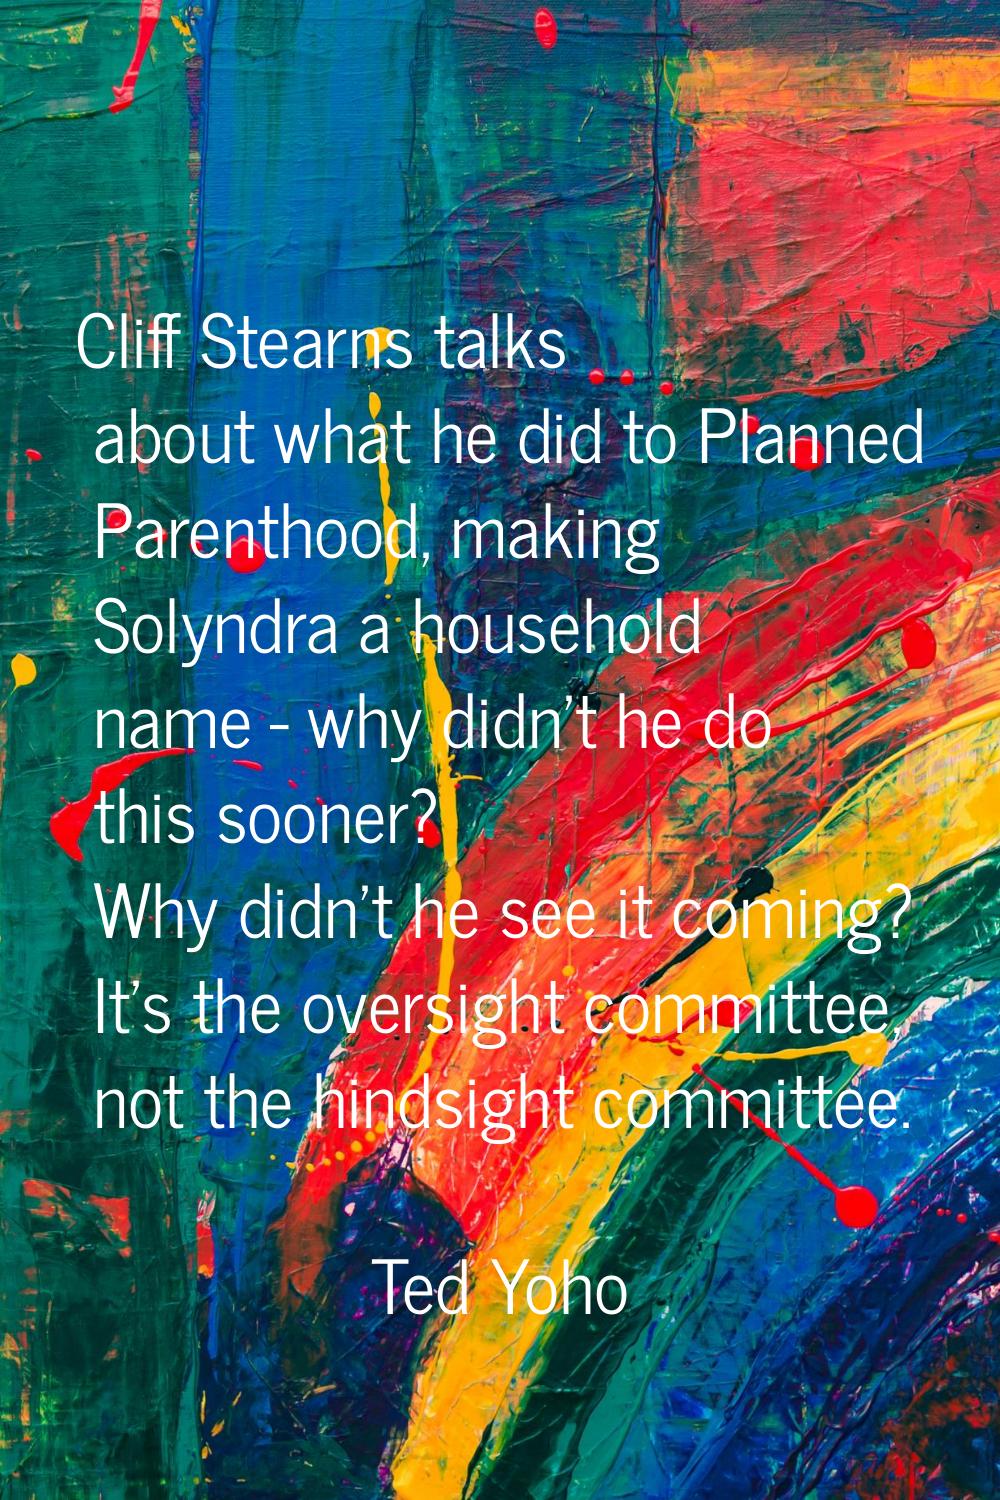 Cliff Stearns talks about what he did to Planned Parenthood, making Solyndra a household name - why